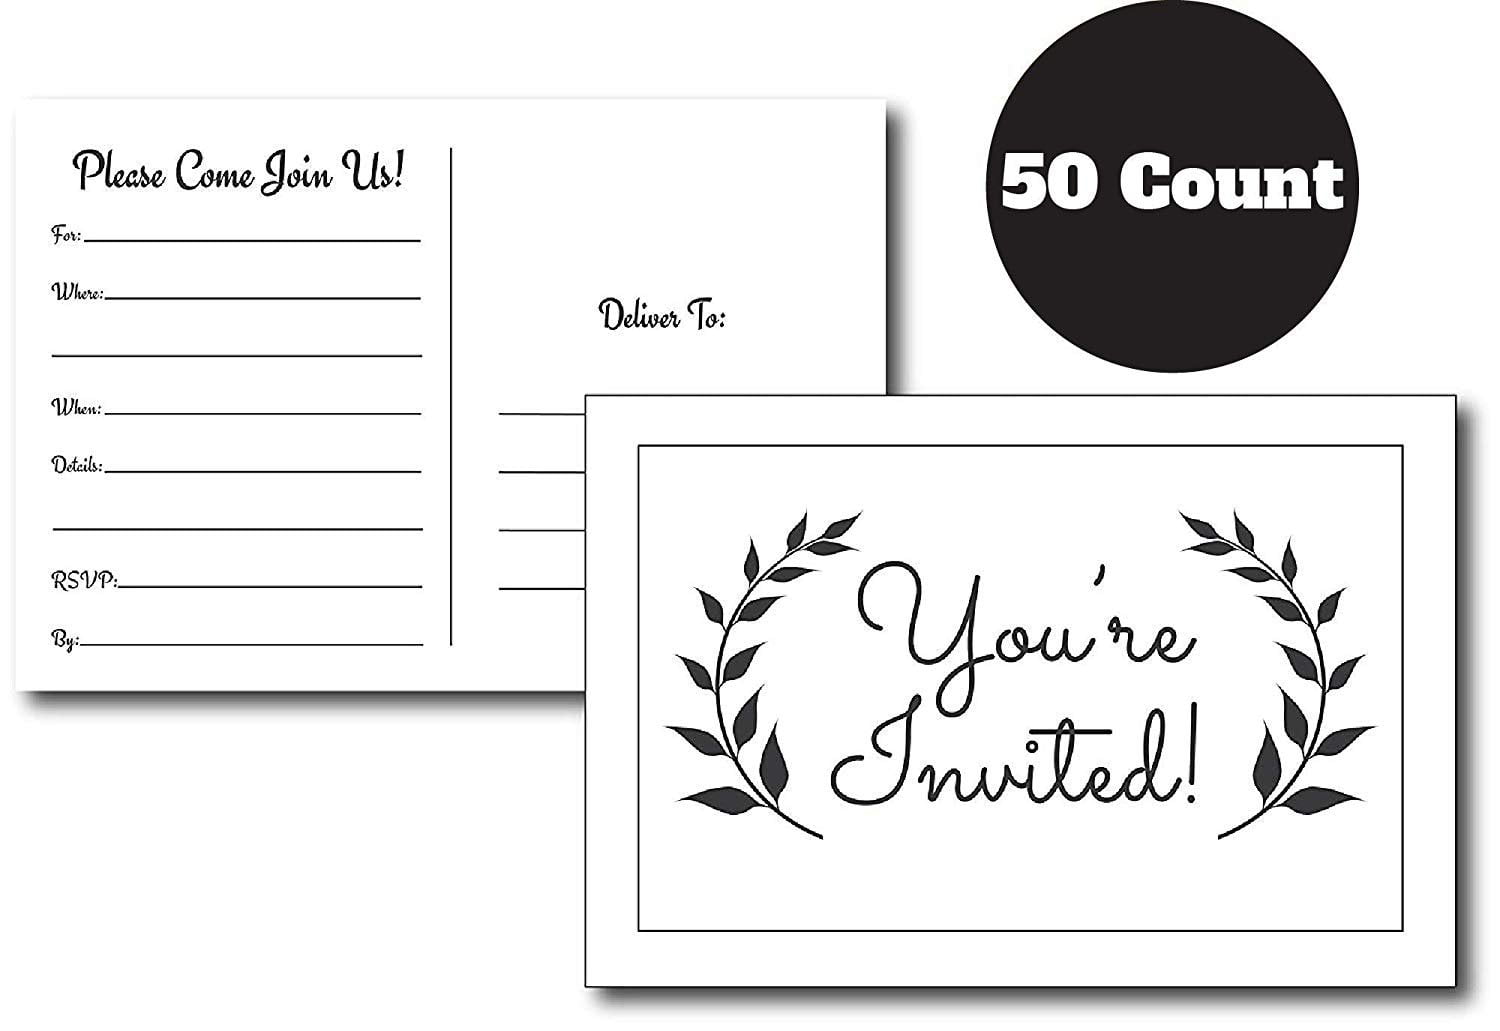 50 Simple & Modern Fill in Party Invitations for Any Occasion, Birthday Party Invitations, Baby Shower, Bridal Party, Retirement Party, Party Invitations for Girls, Boys, Men, Women, Graduation Party